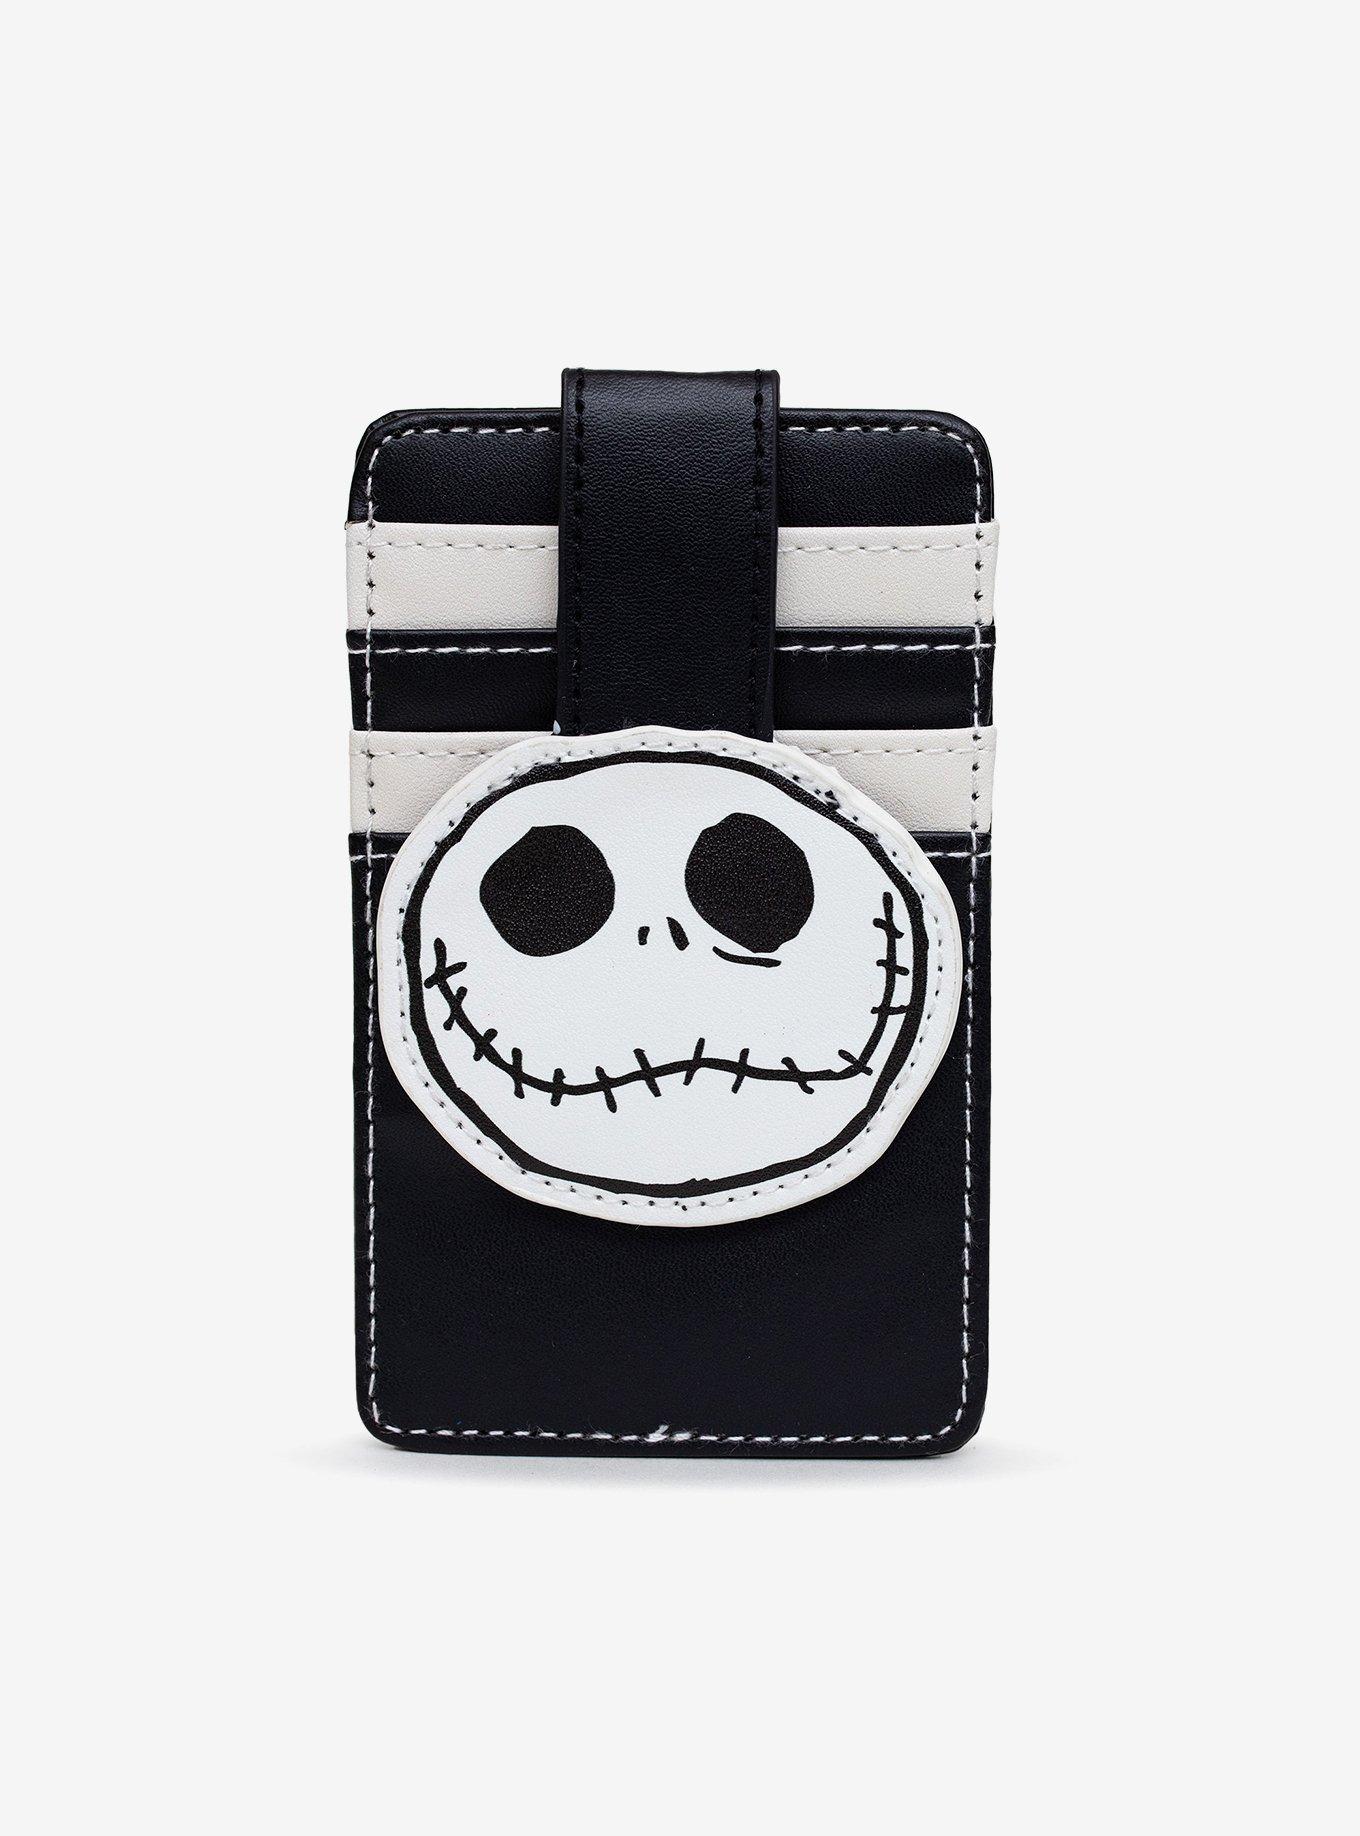 Mini Smiley Cardholder Keychain Pouch, Wallet